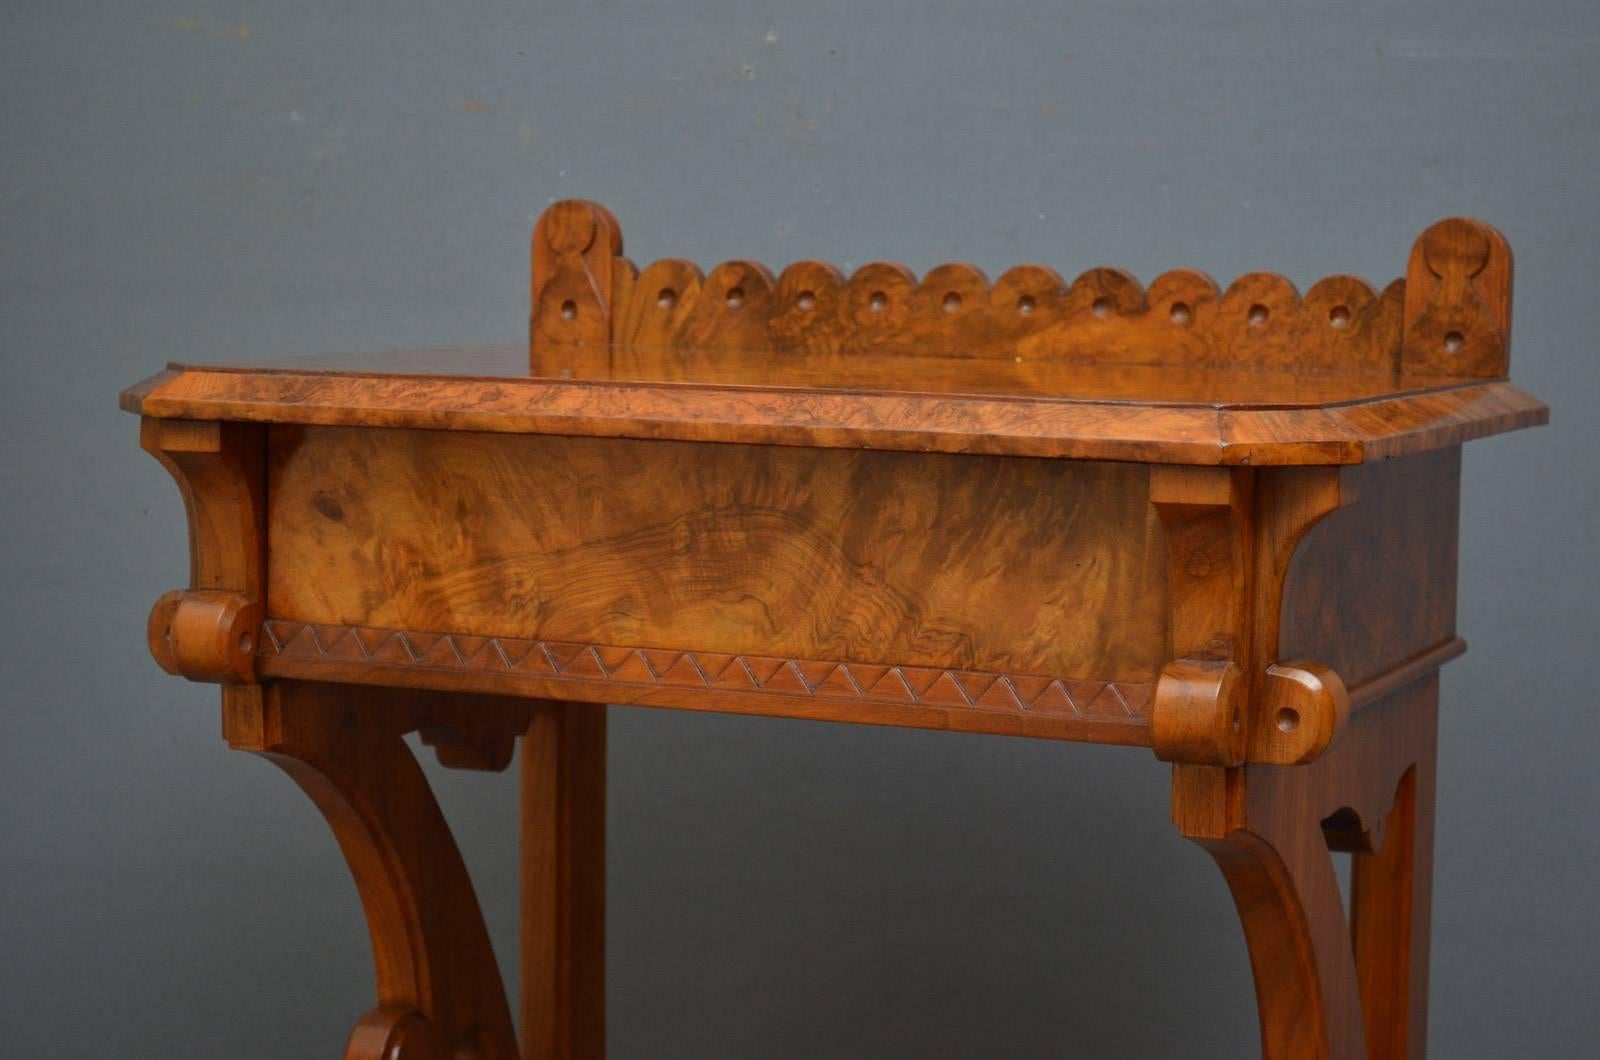 Stylish Gothic Revival Burr Walnut Console Table In Excellent Condition For Sale In Whaley Bridge, GB